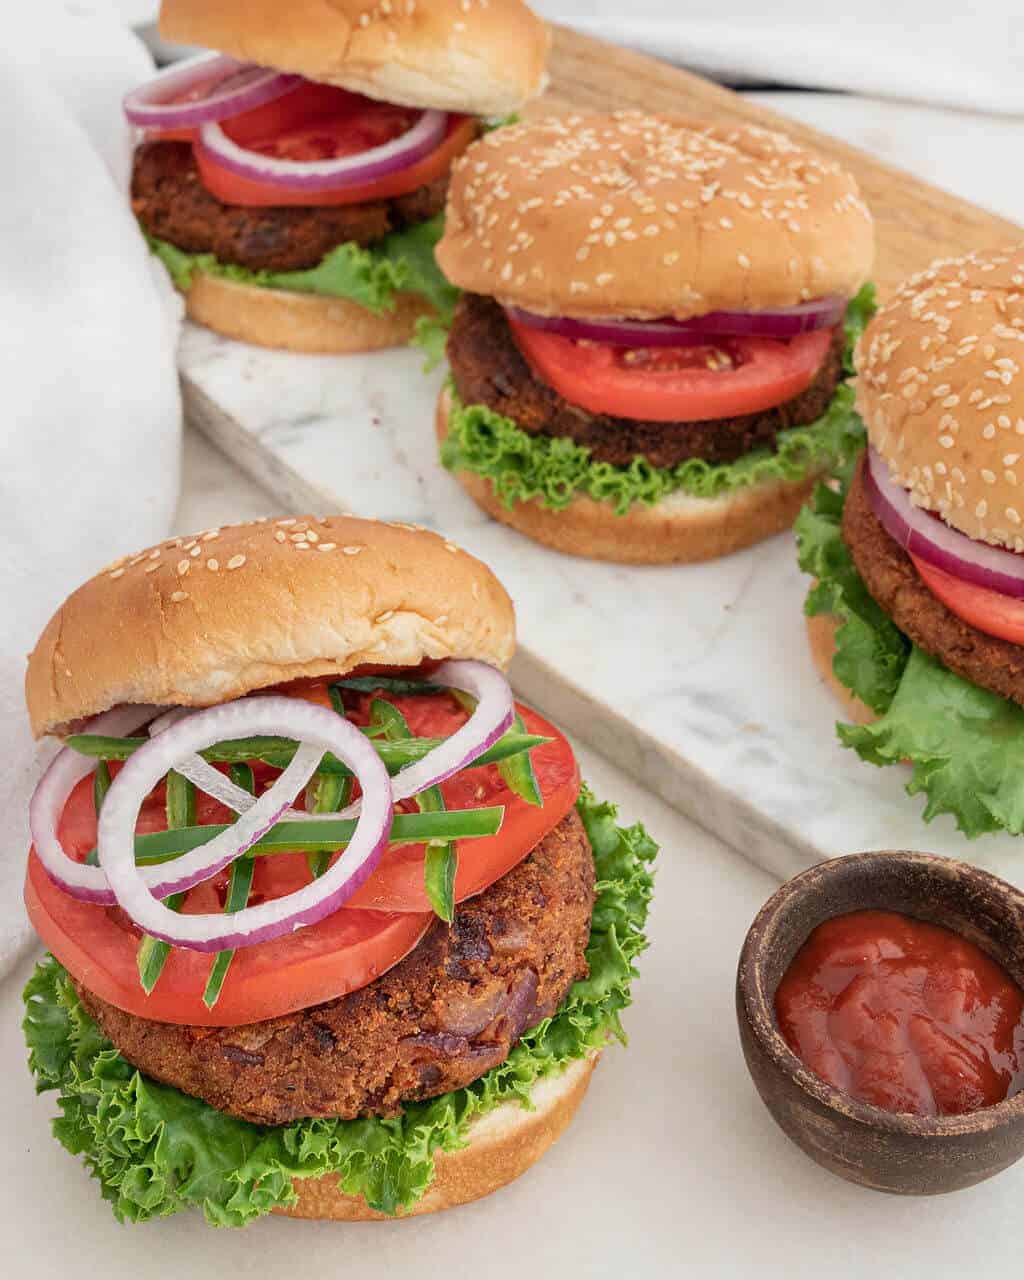 Spicy Red Bean Burgers on buns loaded with all the fresh toppings.